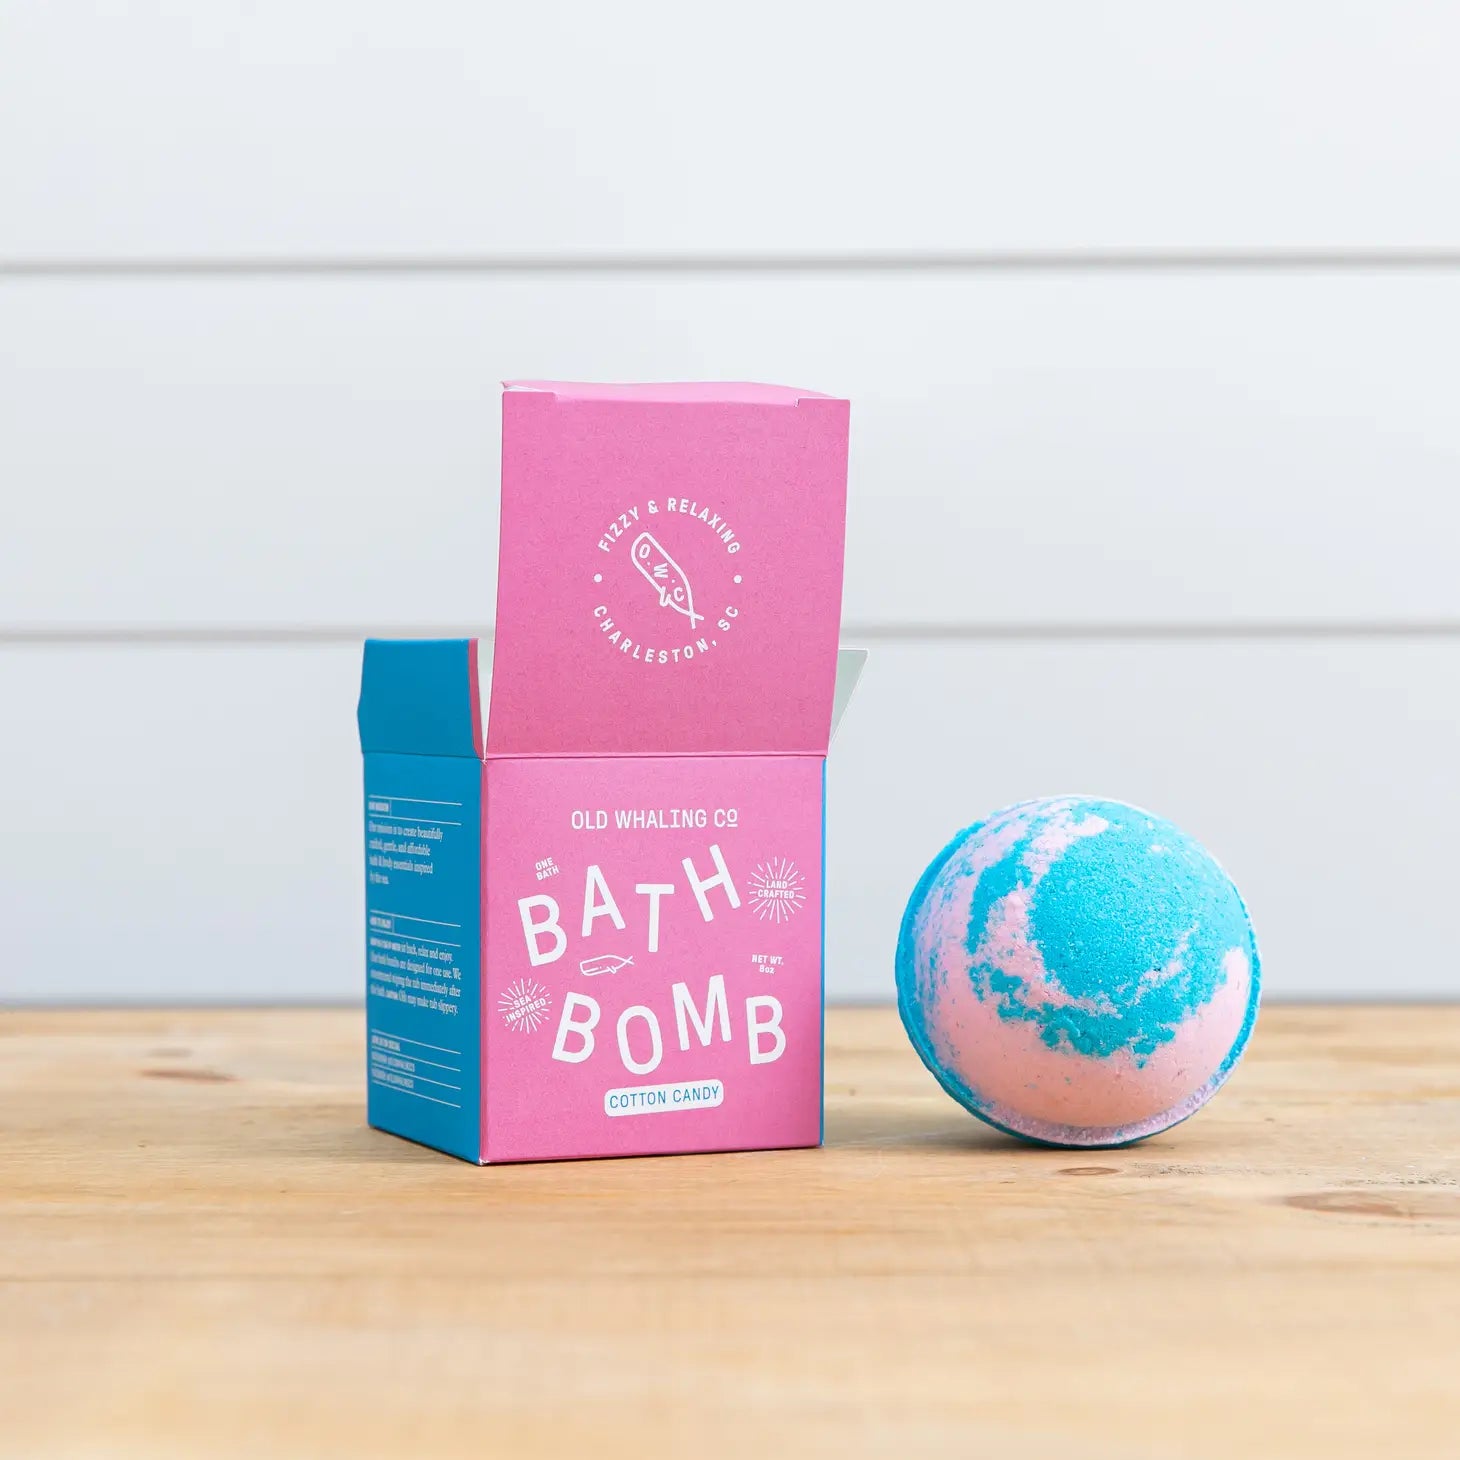 Old Whaling Co. | Bath Bomb: Cotton Candy